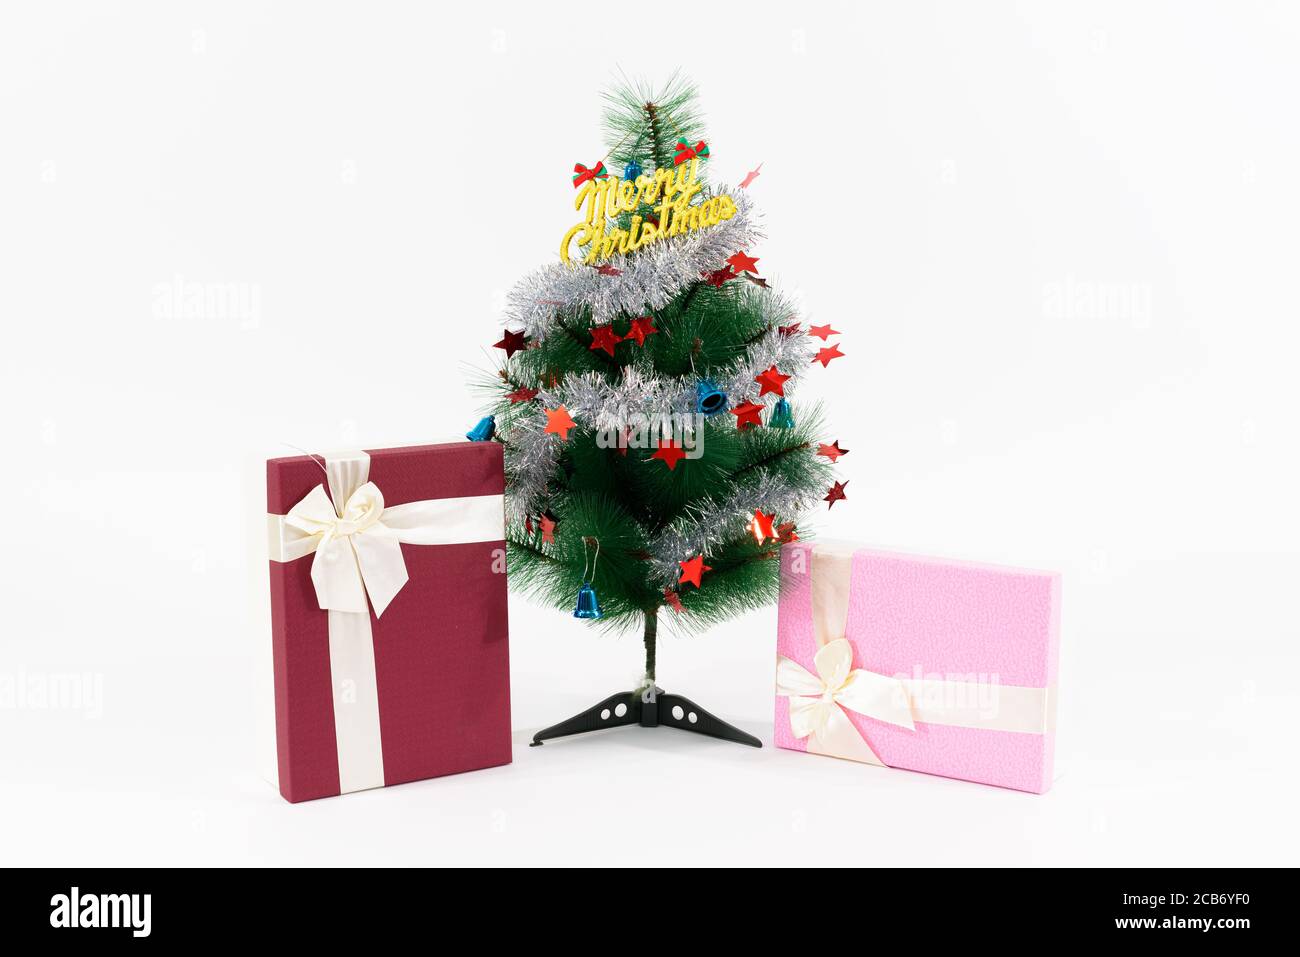 Christmas presents under decorated Christmas tree with Merry Christmas text against white background Stock Photo